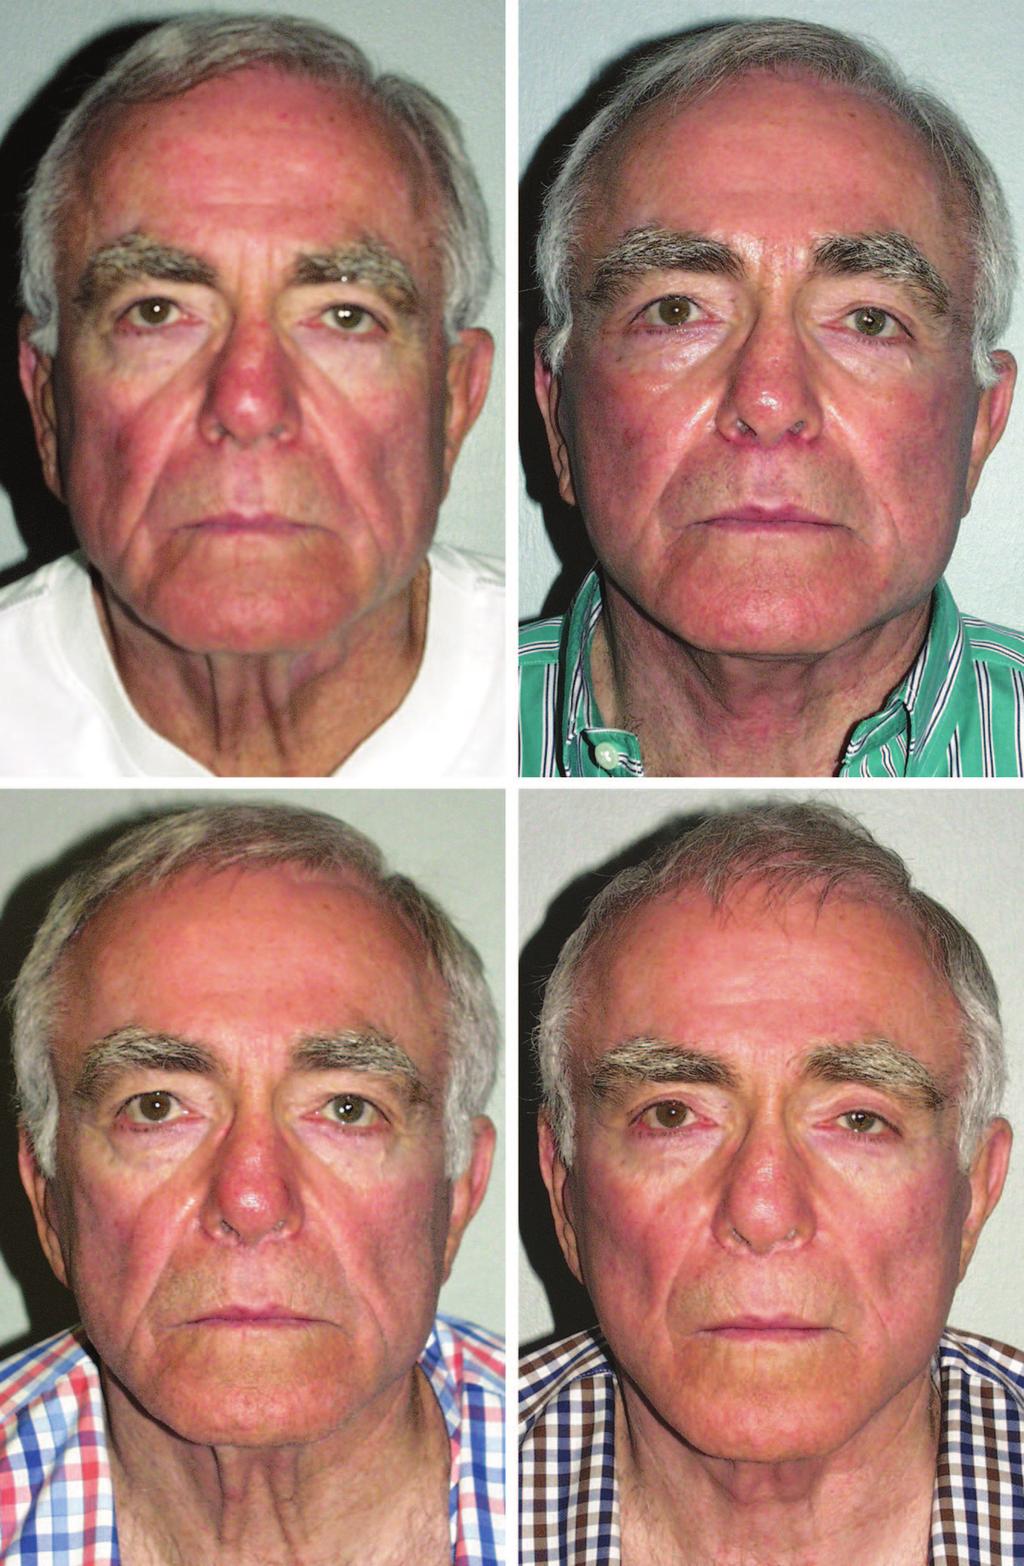 Volume 126, Number 1 Longevity of SMAS Surgery tertiary face lift. Therefore, it is important to be able to accurately convey the longevity of the face lift procedure.